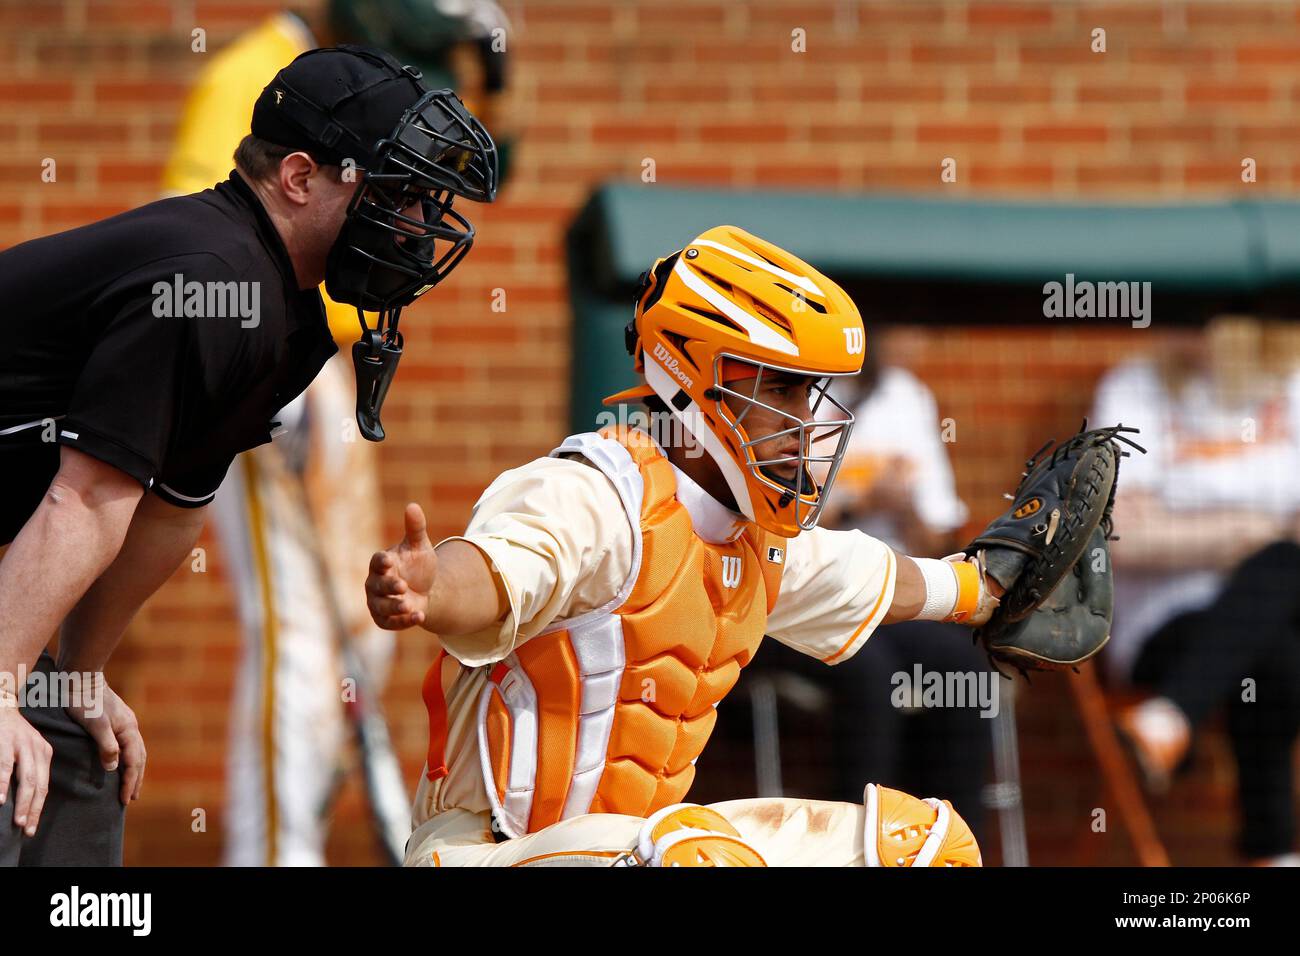 Tennessee catcher Benito Santiago (31) stands at the plate during